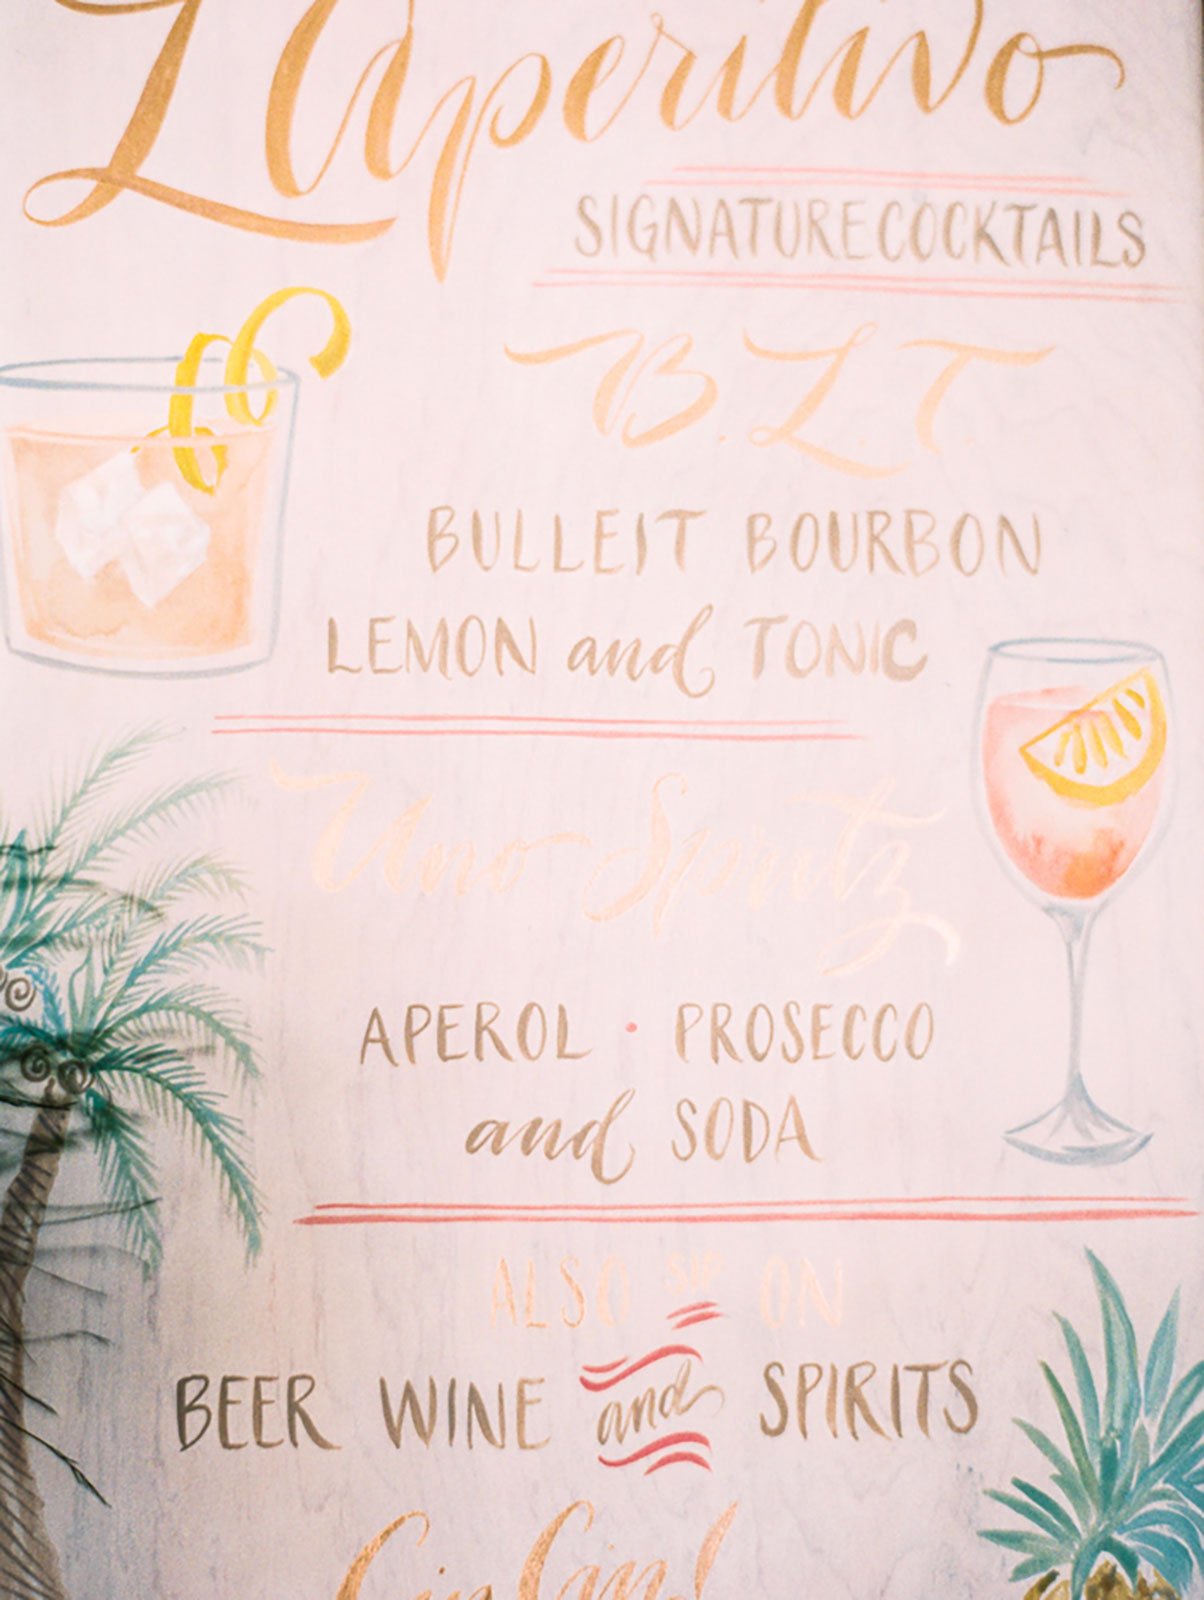 Italian Aperol Spritzers and Limoncello were served in honor of the couple's heritage at this destination wedding in Islamorada, FL